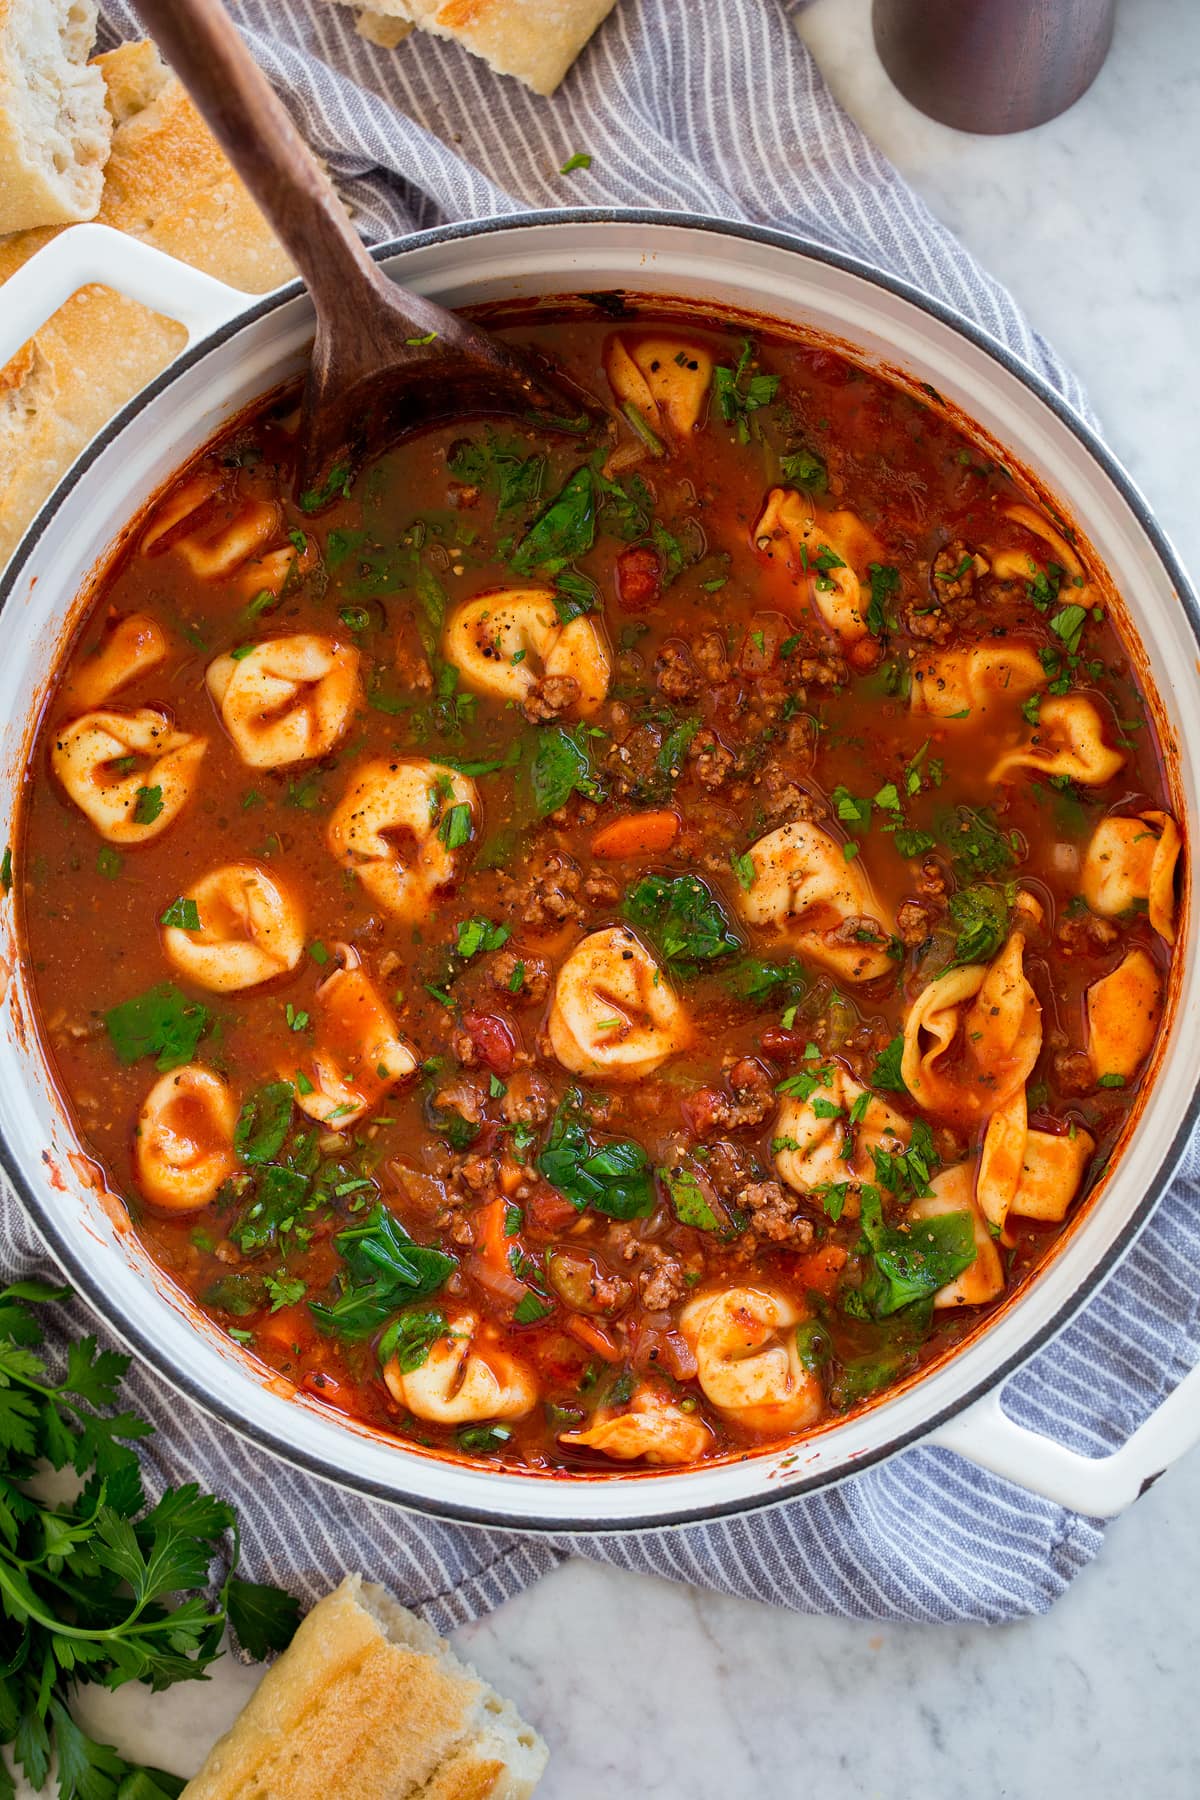 Overhead image of pot full of tortellini soup on a marble surface.